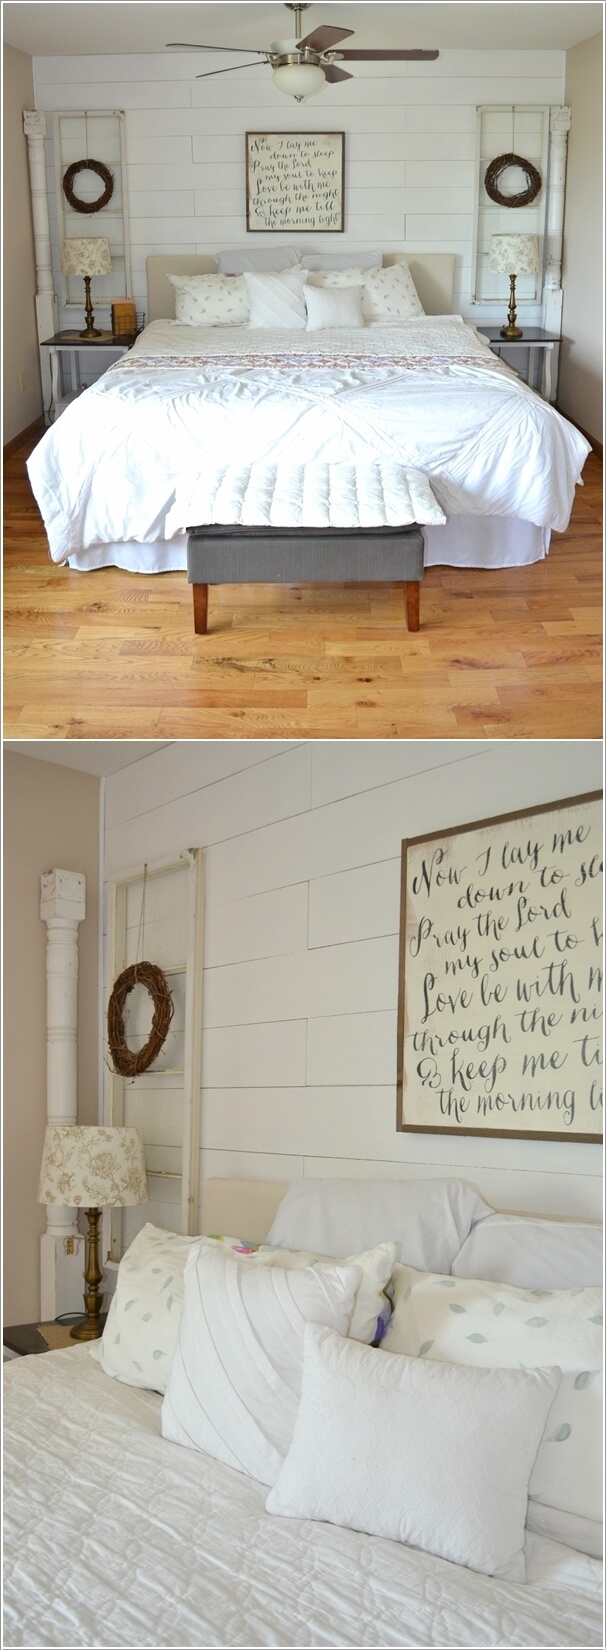 15-budget-friendly-diy-bedroom-decor-projects-14